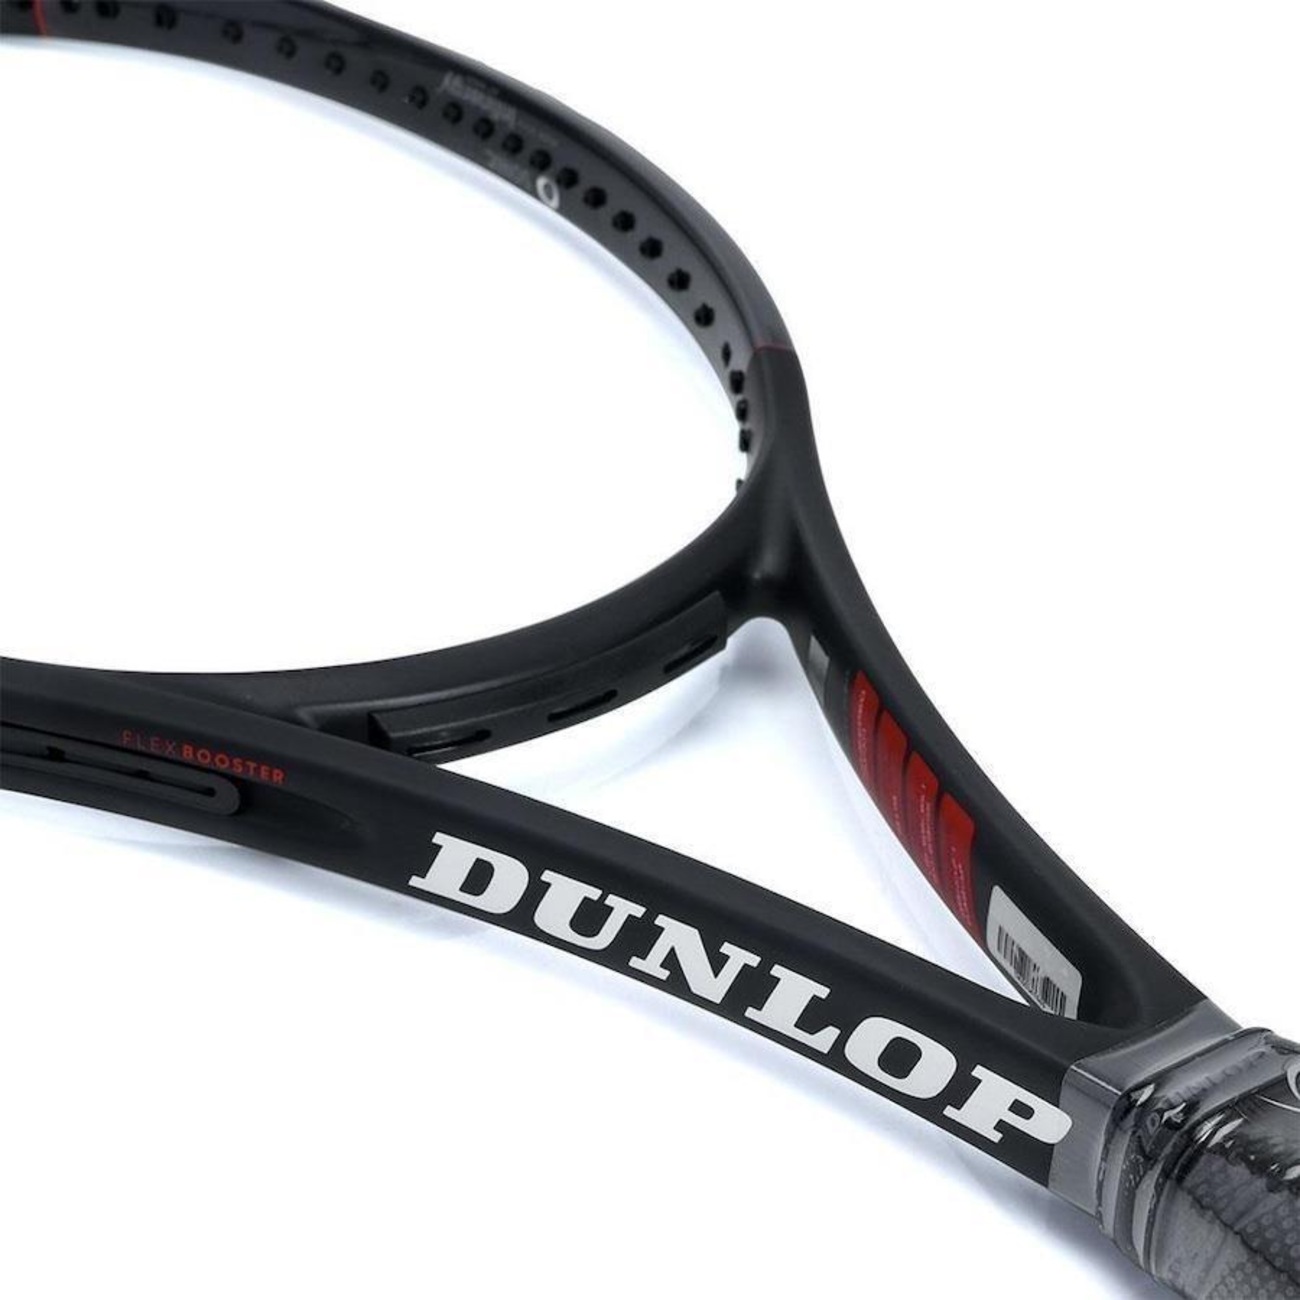 Dunlop CX 200 Limited Edition 今日一番安い www.perfectteeth.com